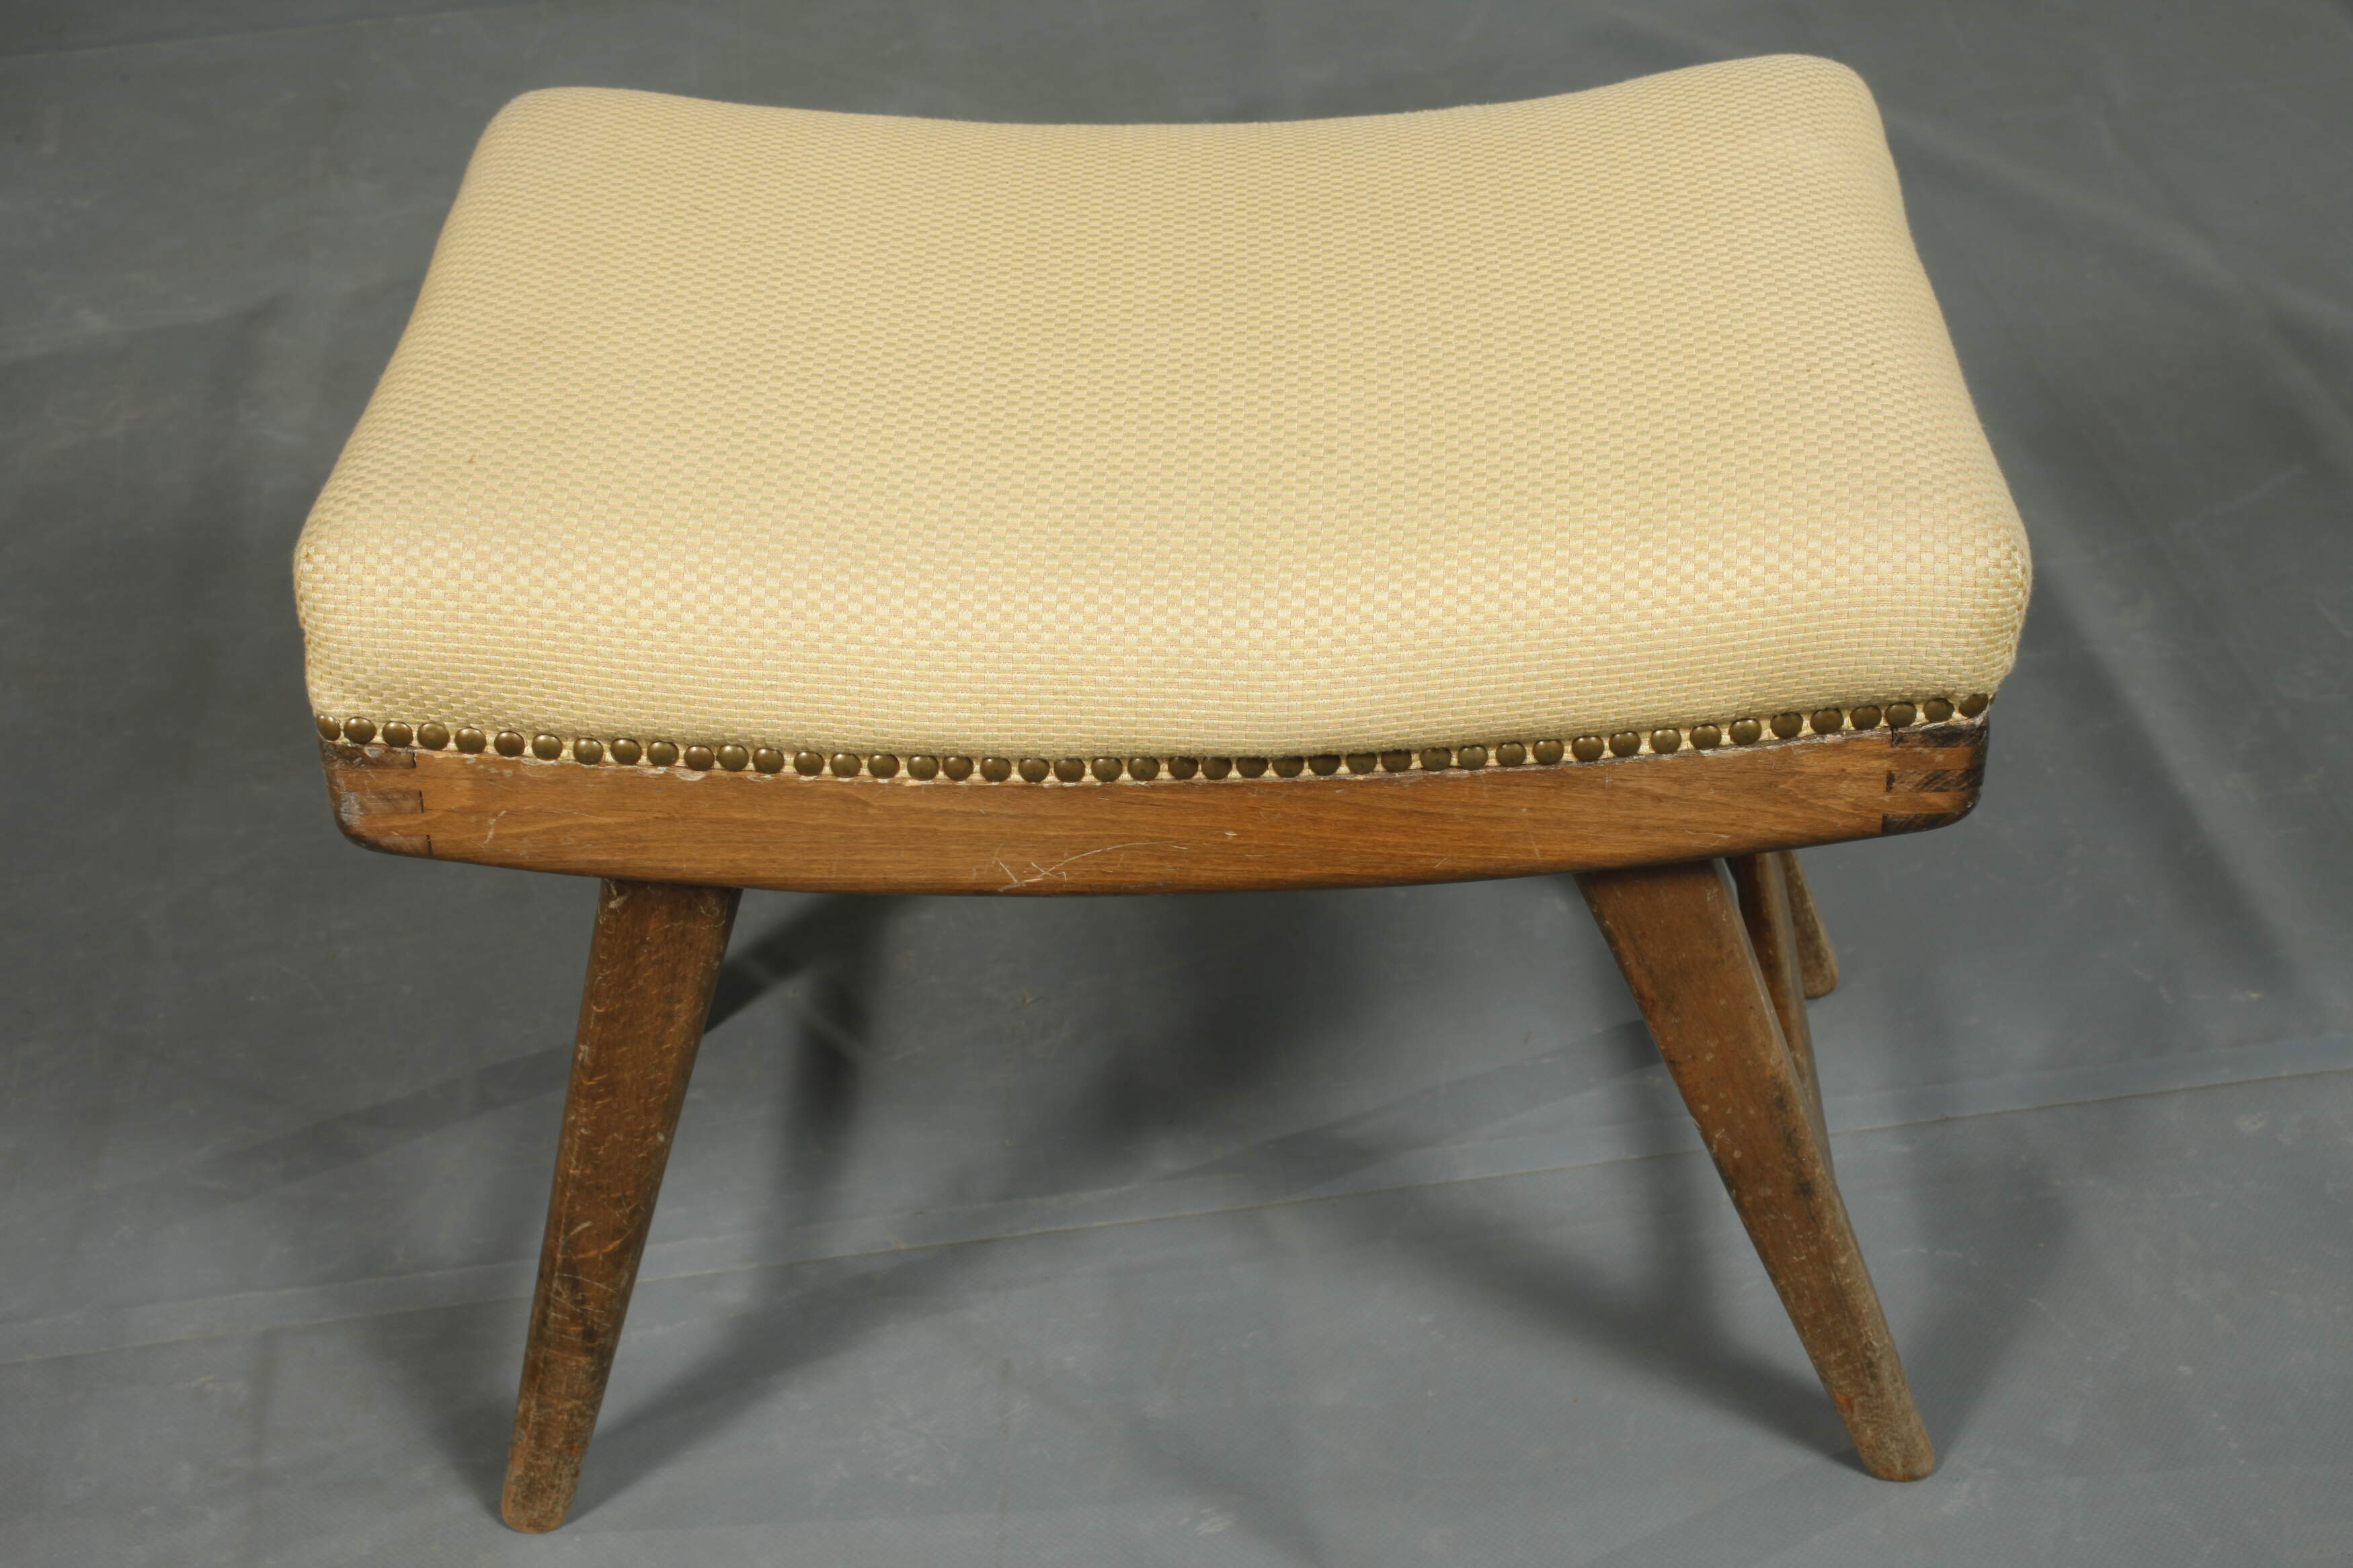 Eared back armchair with ottoman - Image 2 of 7